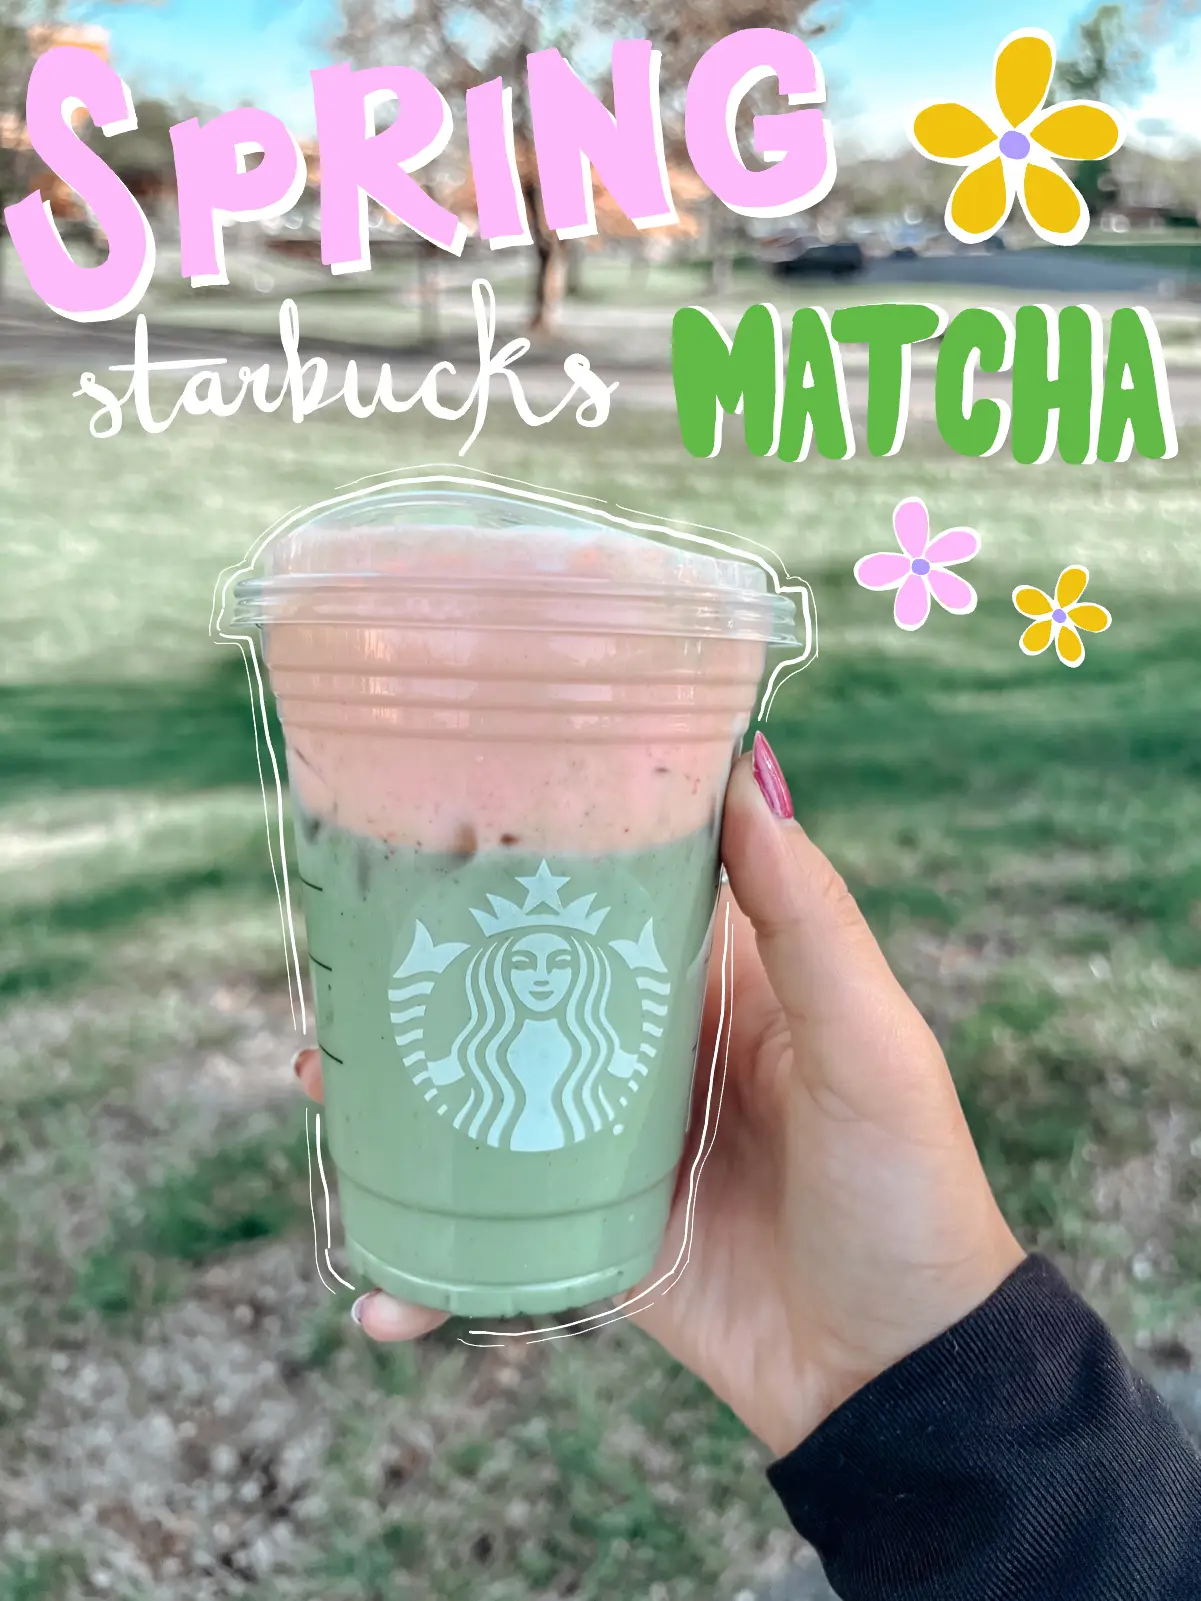 Starbucks' spring menu is here: How to make the iced matcha drink